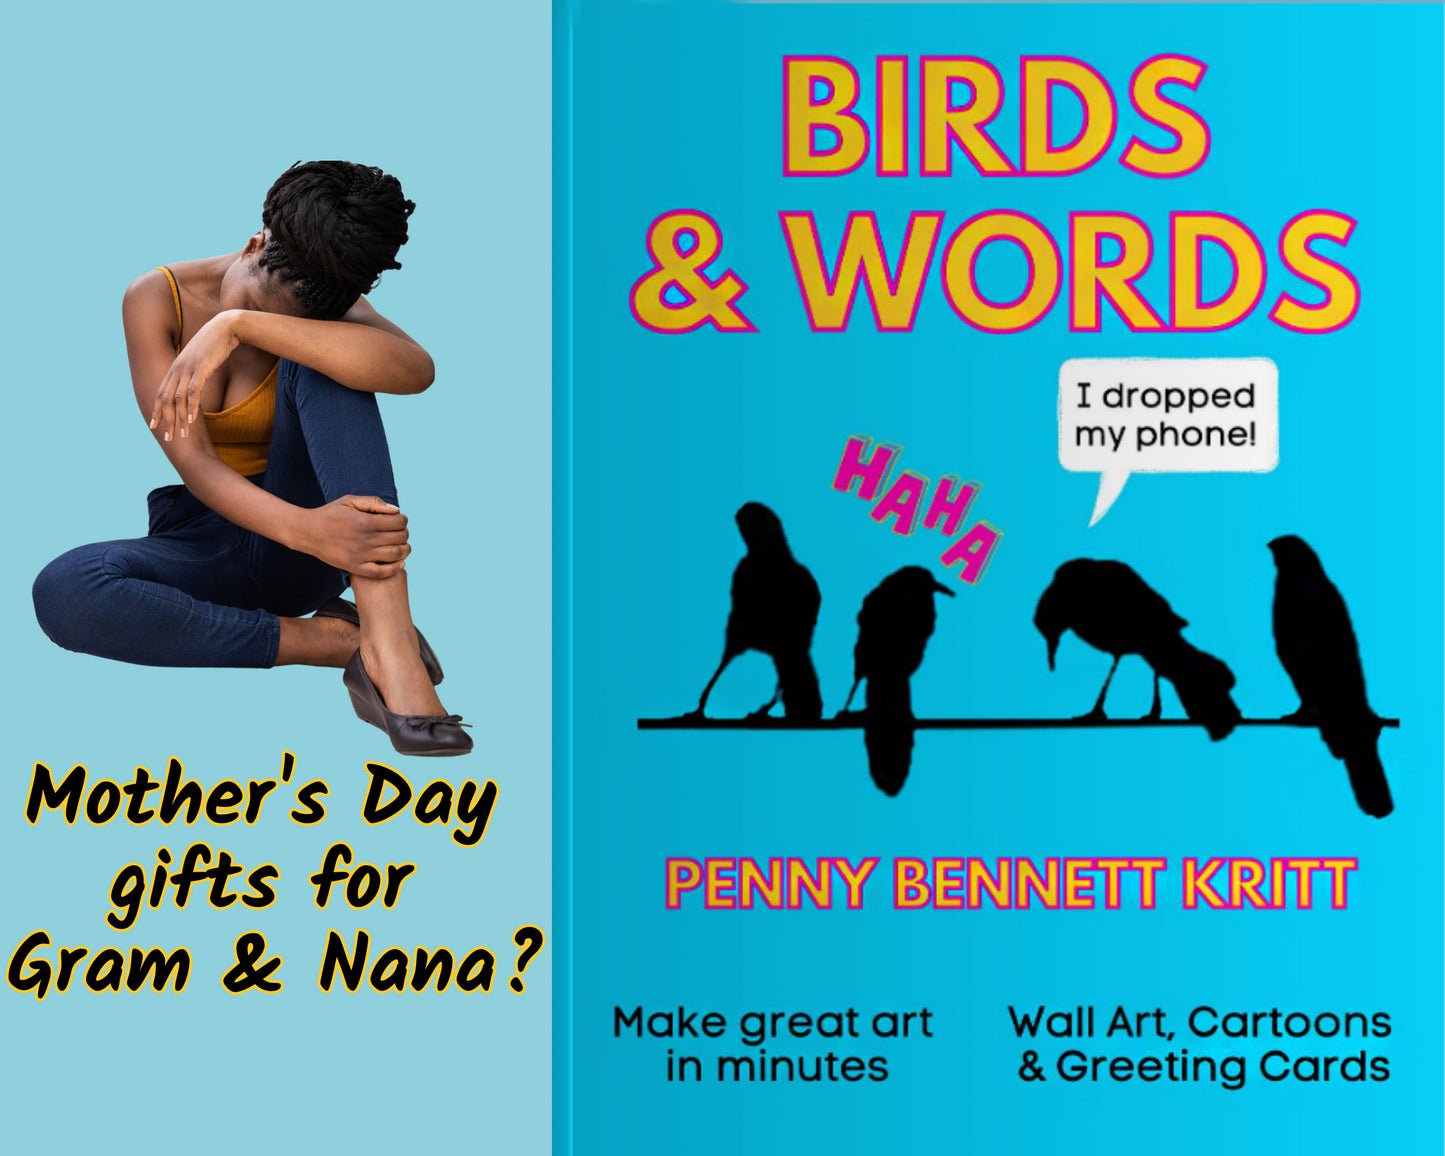 Here's a great gift for mom. She can make penguins clean up their bedrooms (unlike your brother. . .). Or maybe she'll just make a turducken.